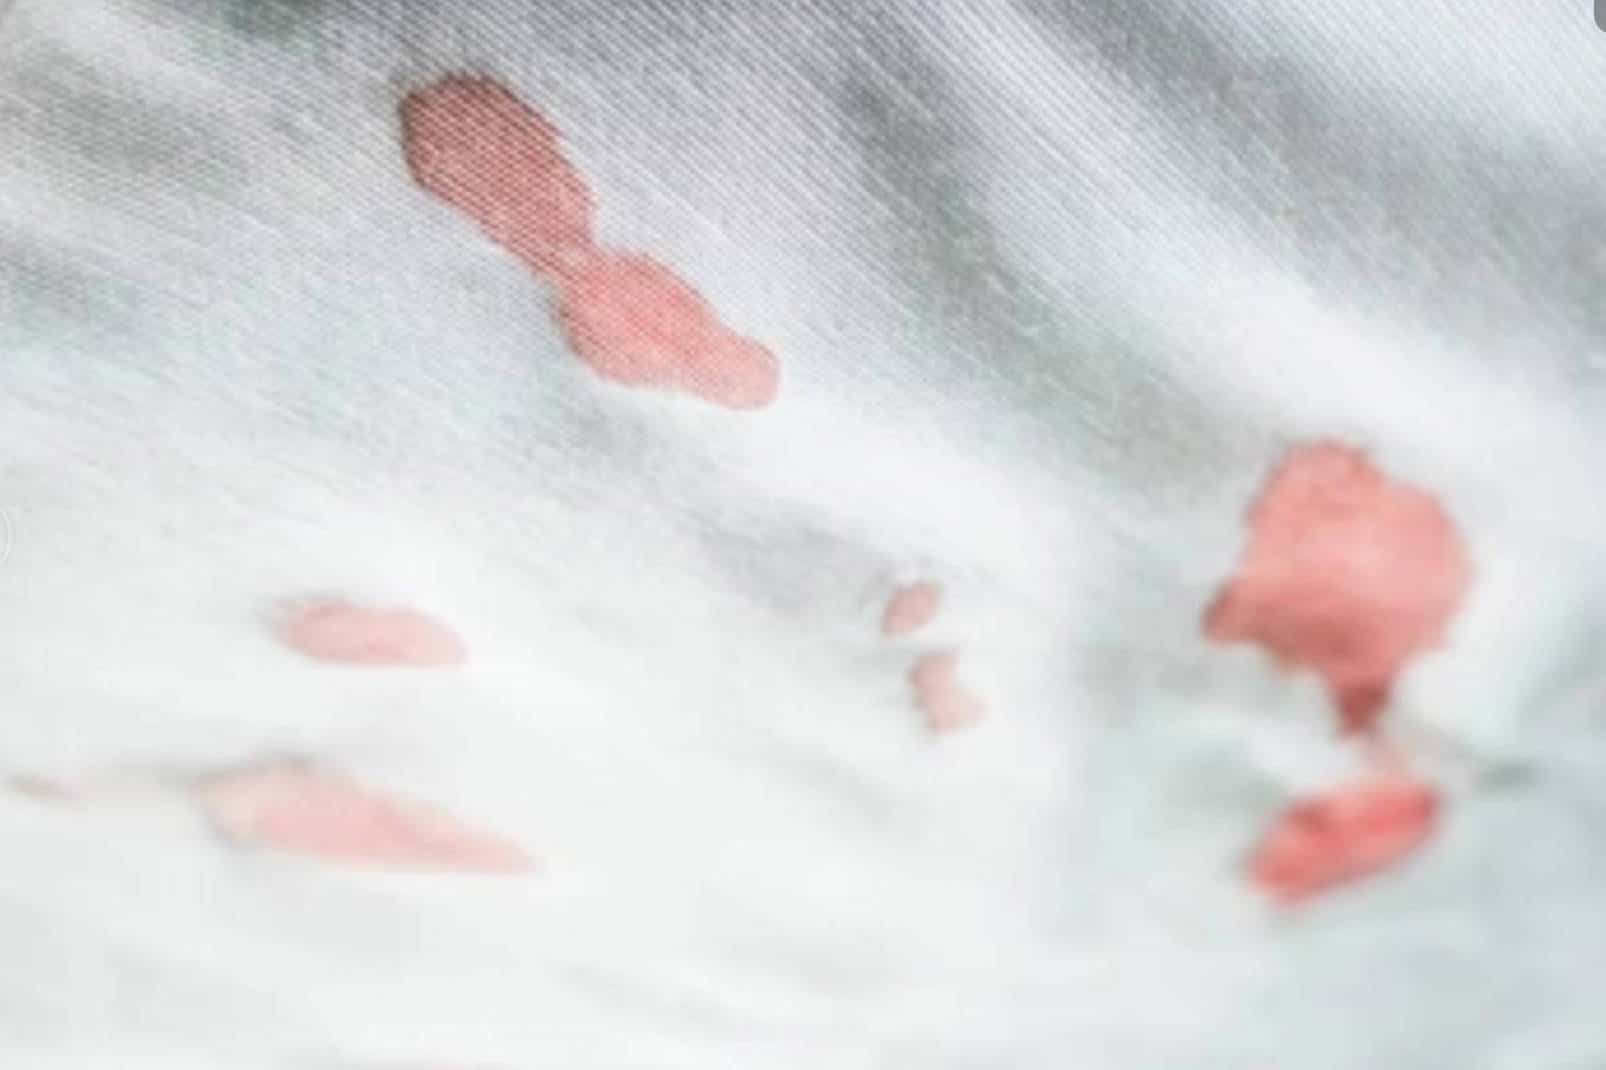 Dried Cherry Juice Stains from Clothes